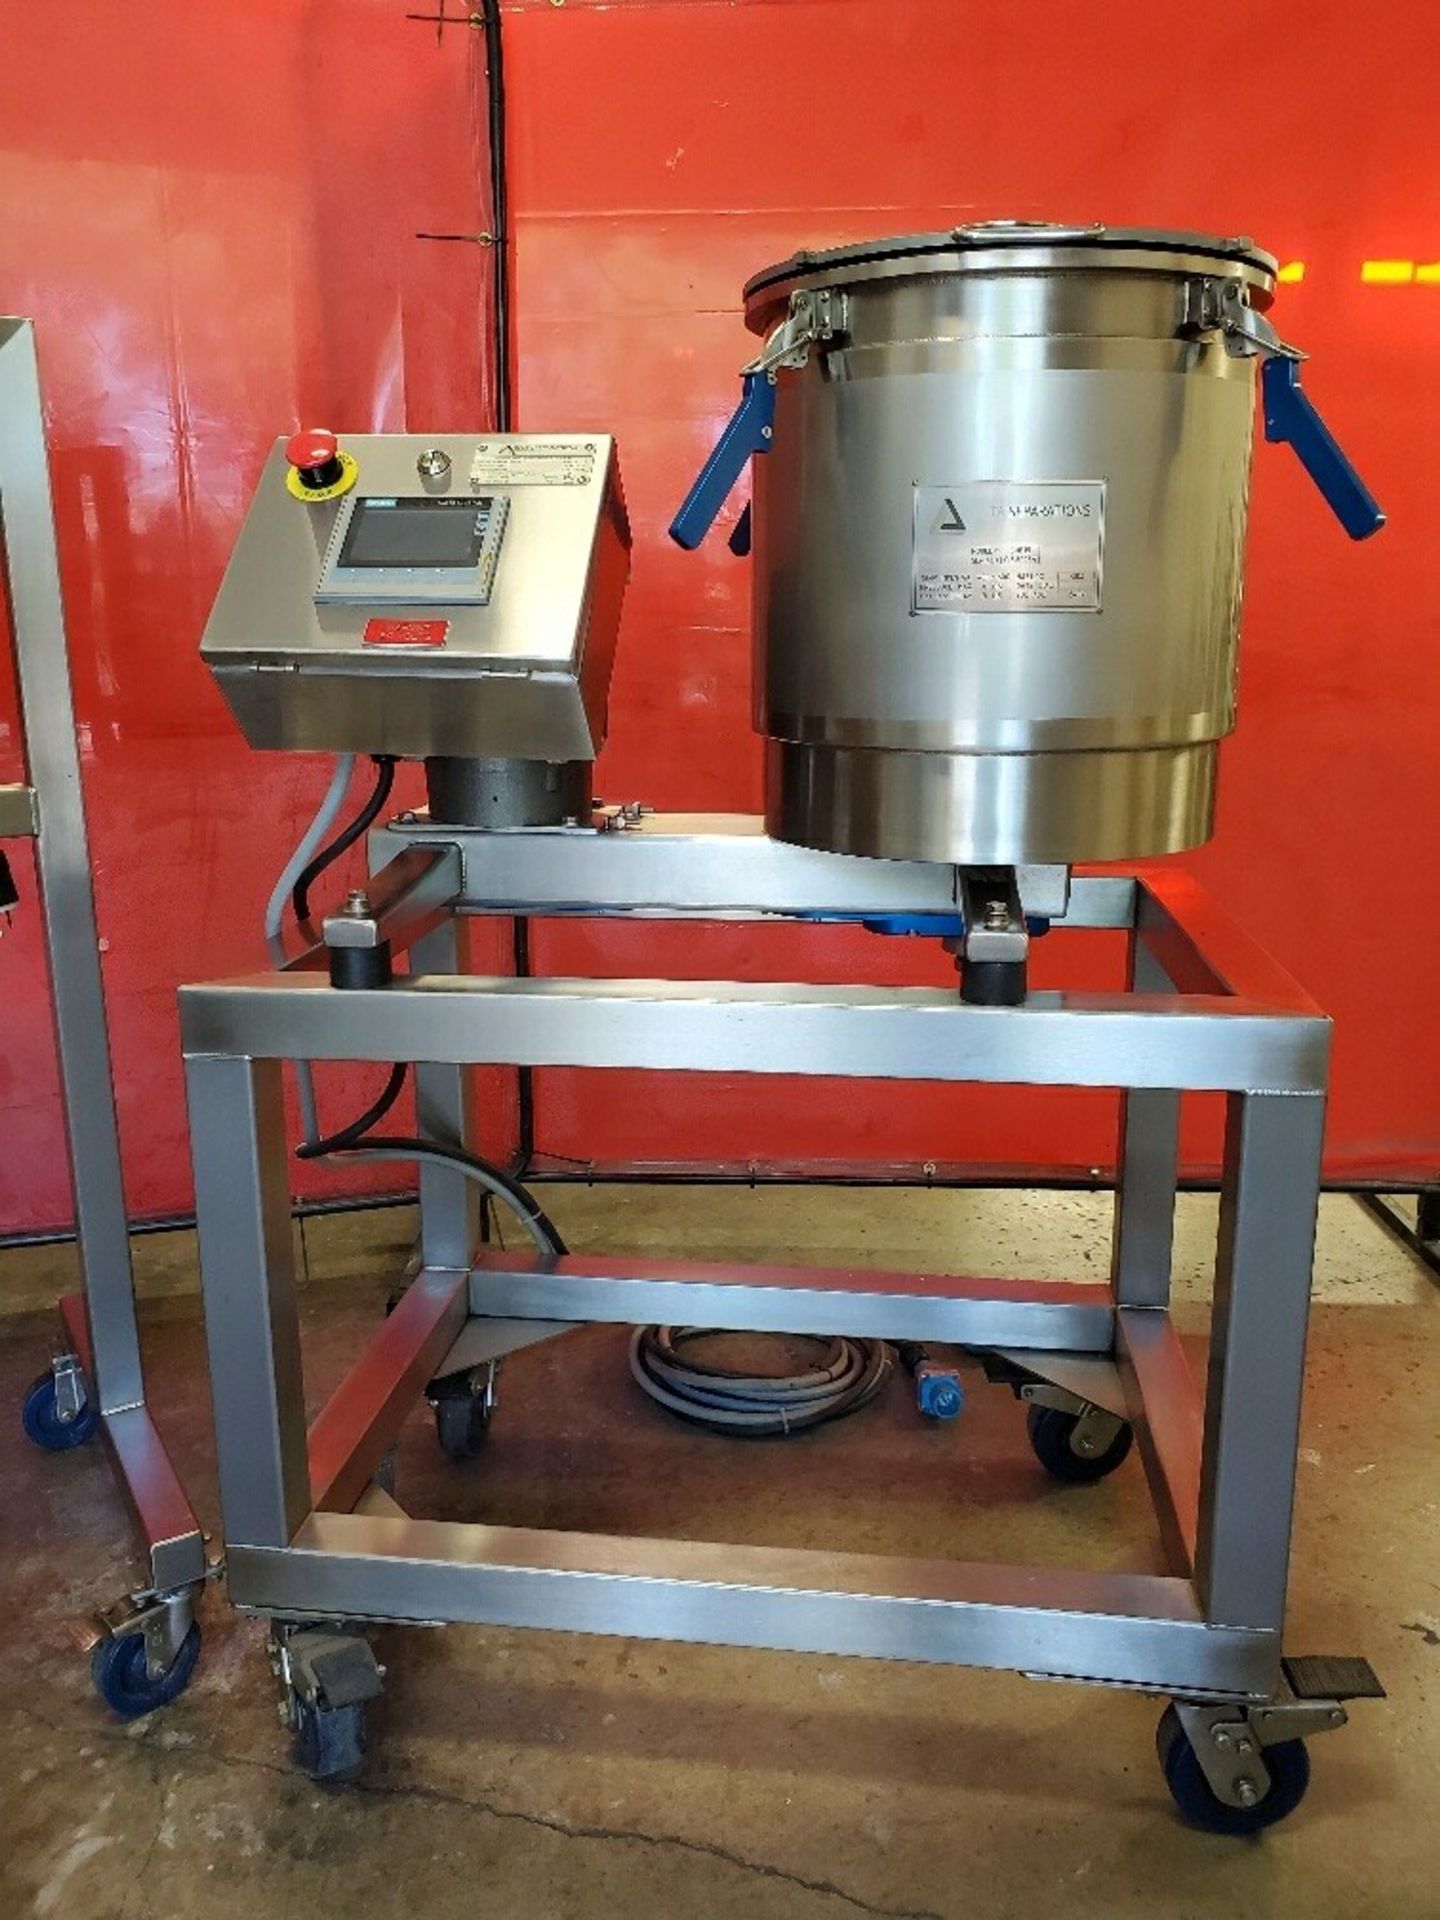 ***NEXT BID HITS RESERVE*** Used- Delta Separations Ethanol Extractor, Model CUP 15 Gen 1.2 - Image 2 of 2